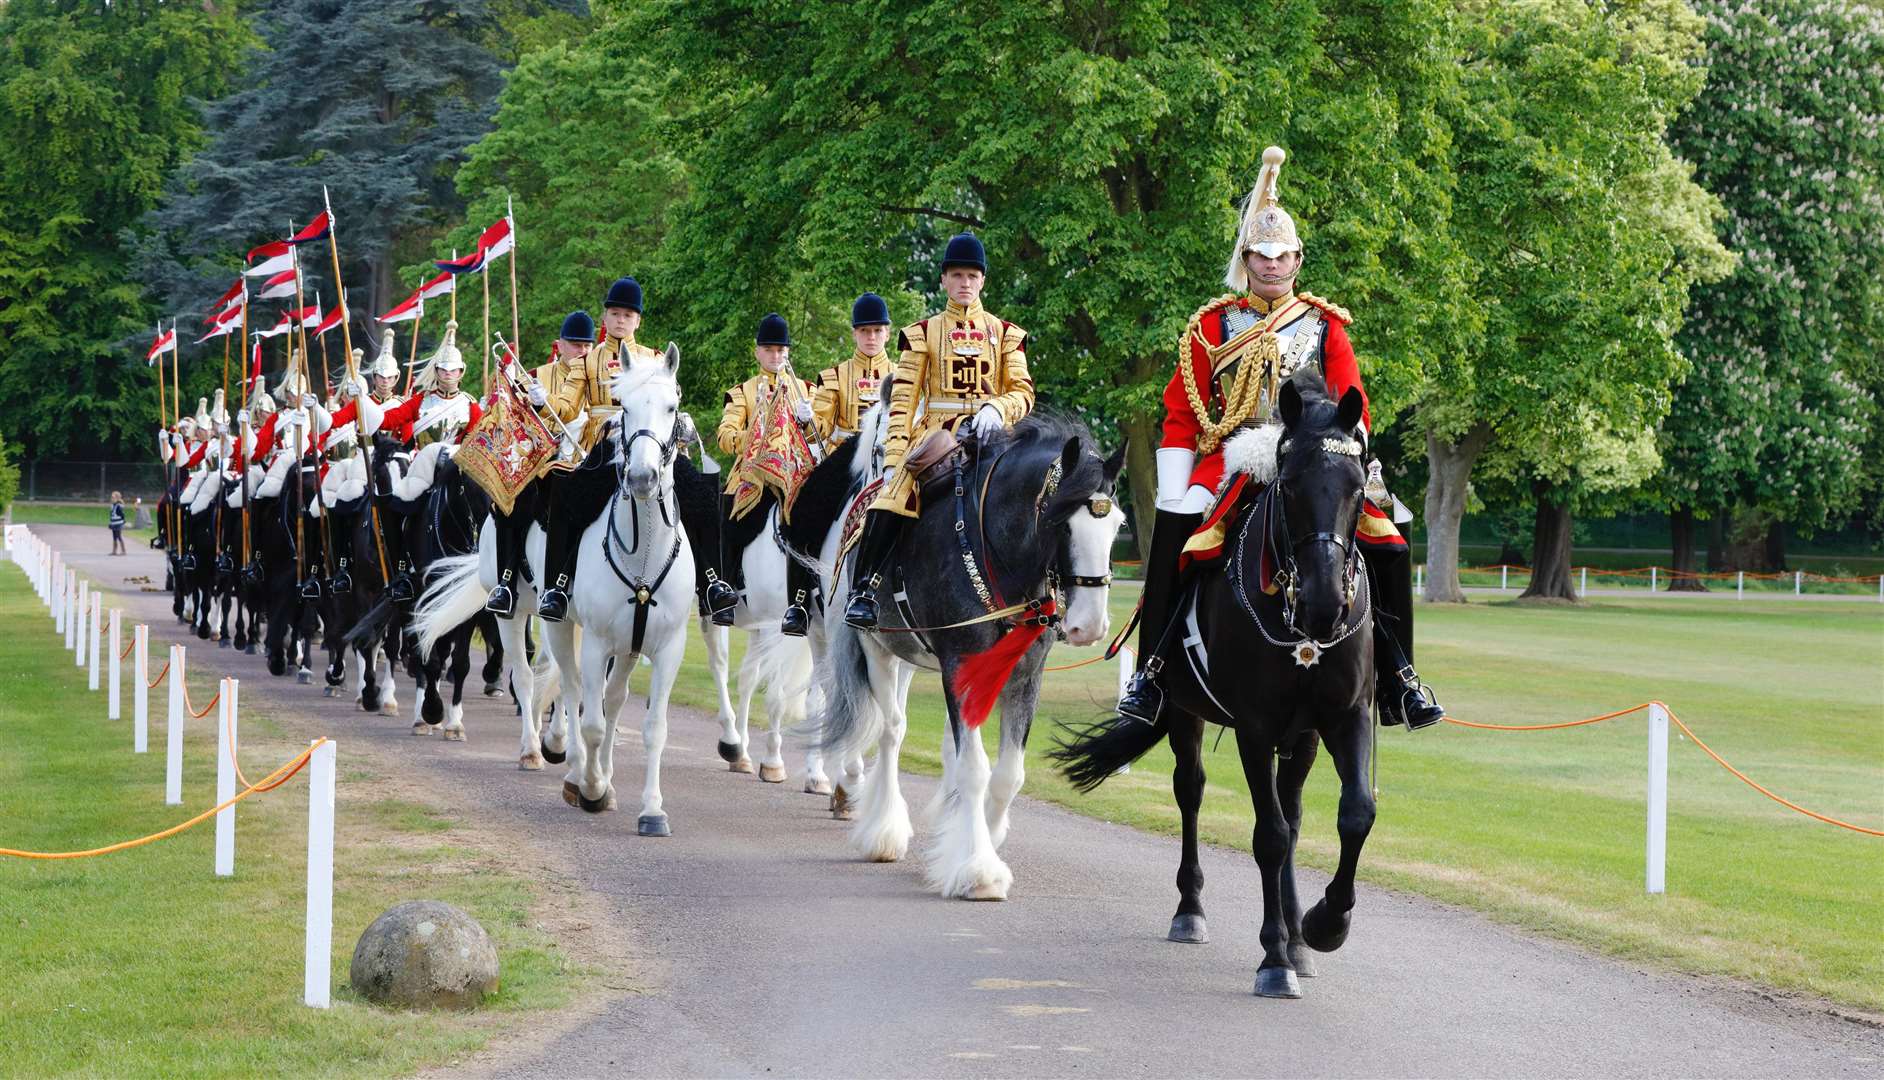 The Household Cavalry Mounted Regiment will be at the Kent County Show